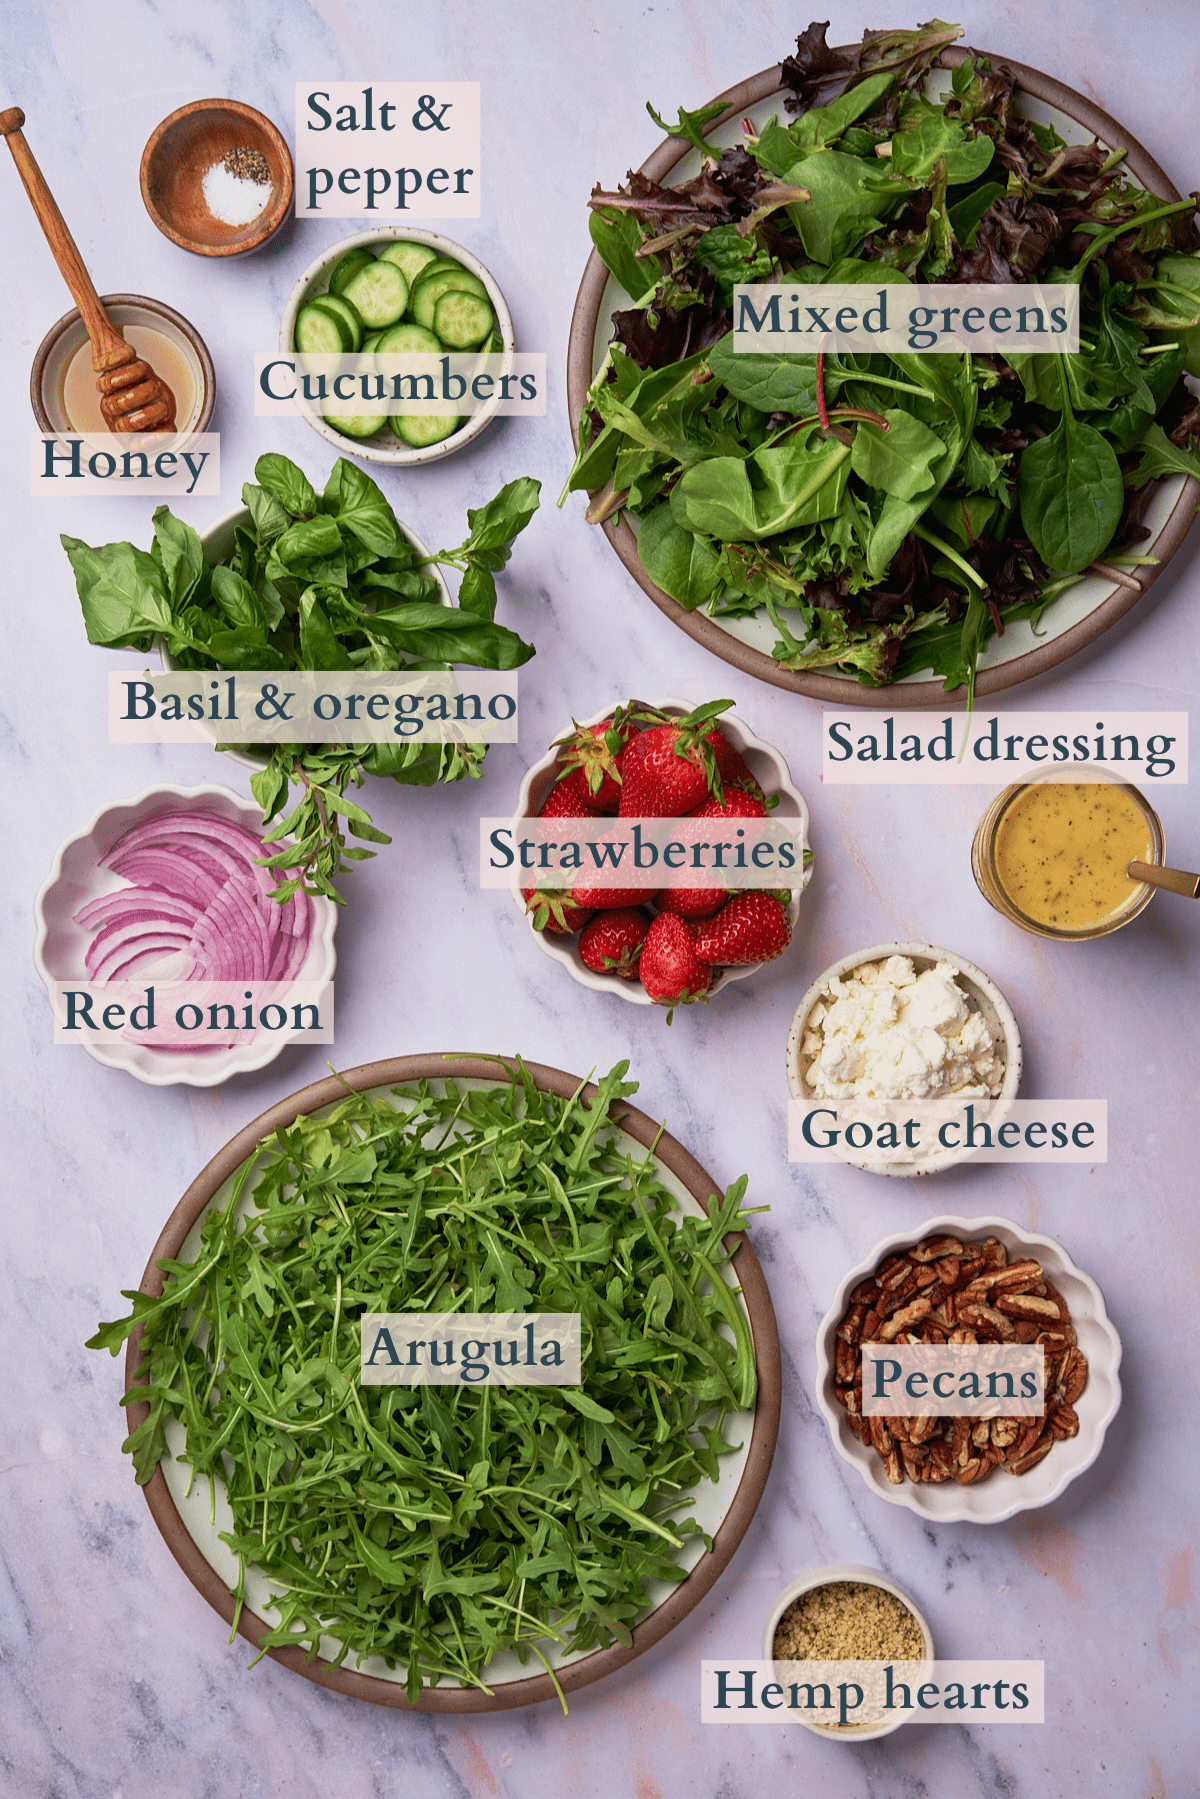 ingredients to make a strawberry goat cheese salad with mixed greens, arugula, red onion, strawberries, goat cheese, cucumbers, hemp hearts, pecans, honey, salt, basil, oregano, and salad dressing with text to denote each ingredient.